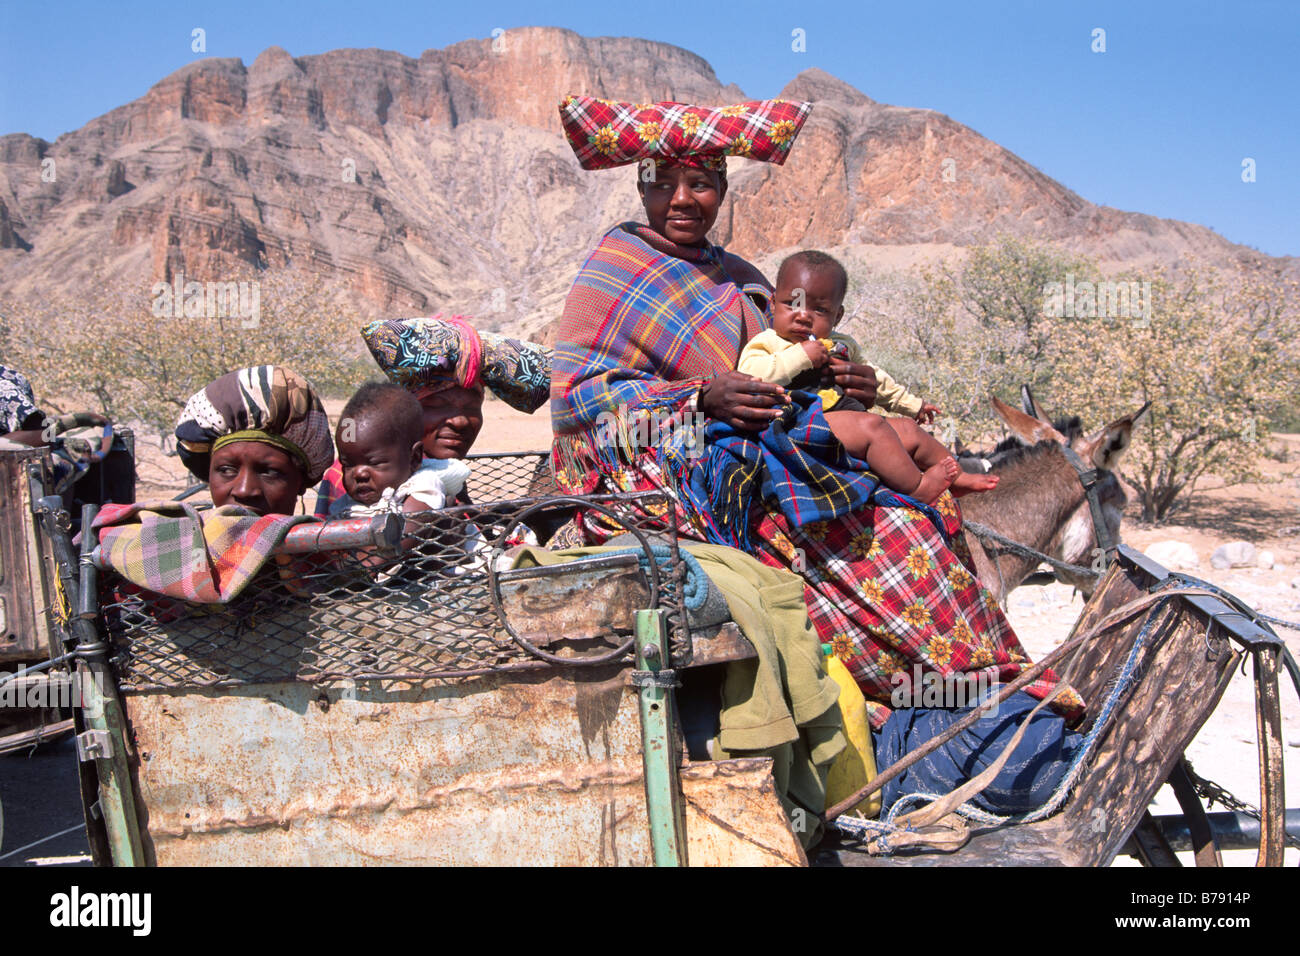 Herero women in characteristic attire with babies on a donkey cart, Sesfontein, Kaokoveld, Namibia, Africa Stock Photo